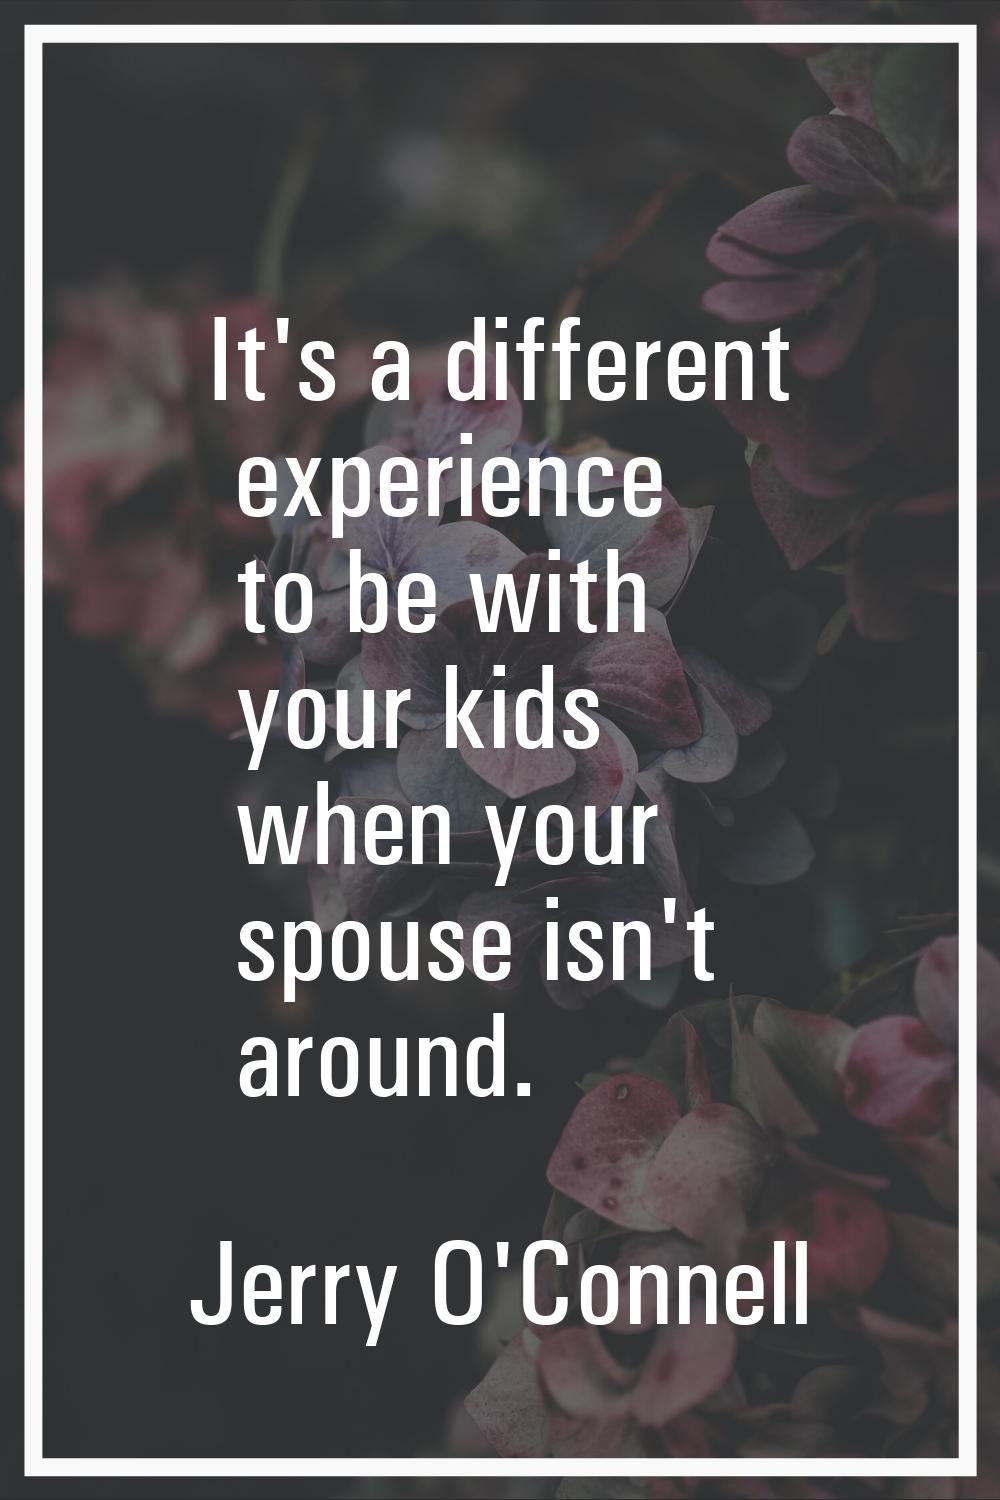 It's a different experience to be with your kids when your spouse isn't around.